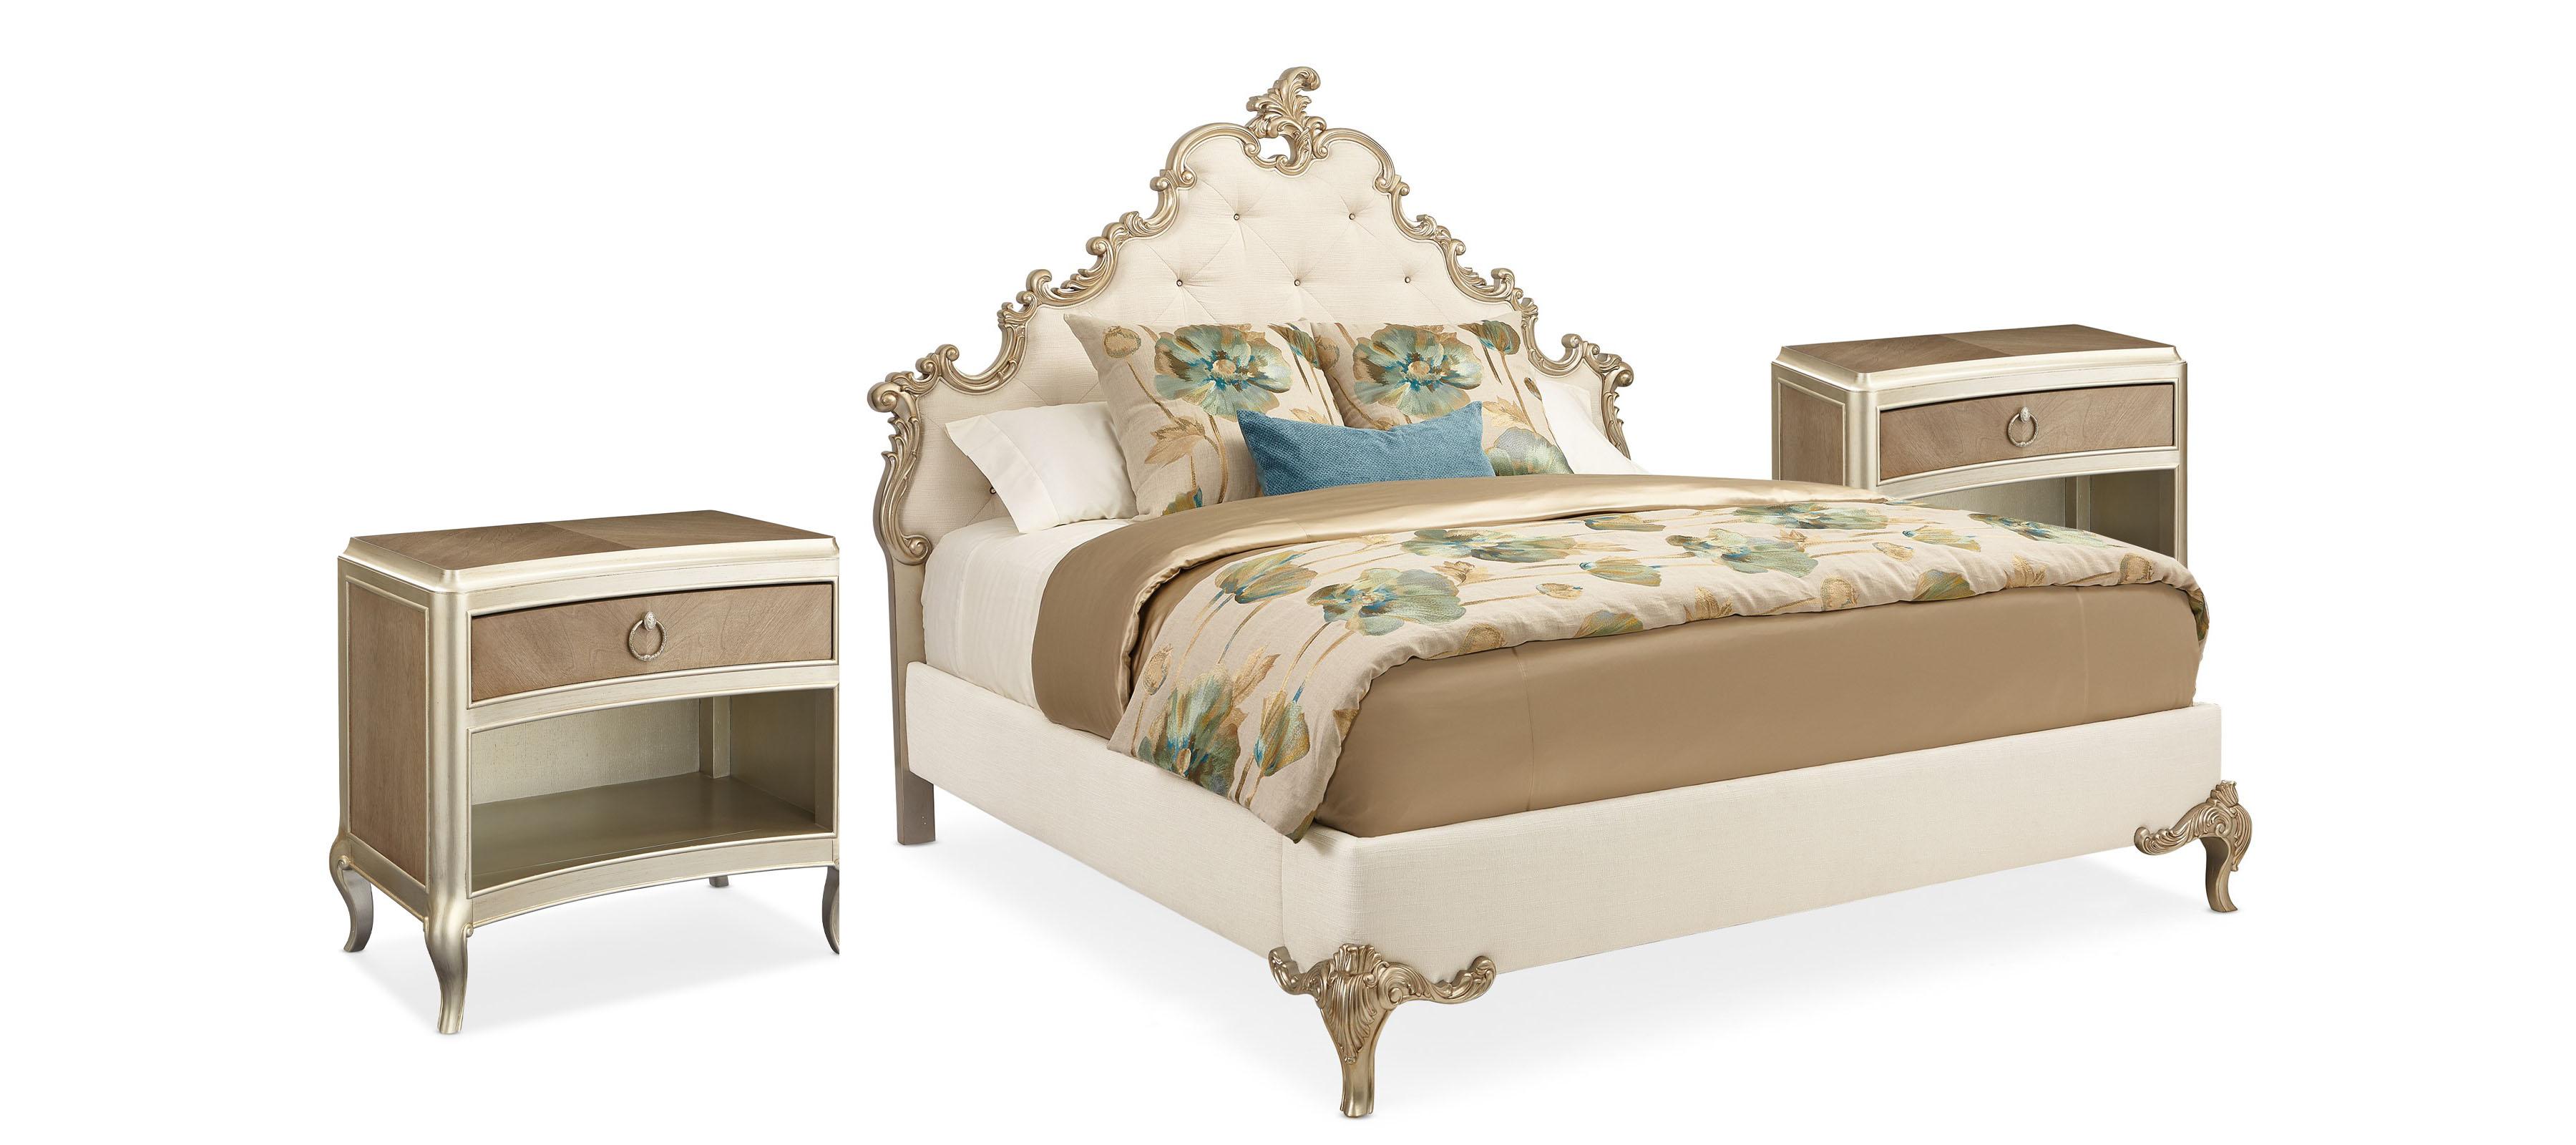 Traditional Panel Bedroom Set FONTAINEBLEAU C063-419-101-Set-3 in Cream, Gold Fabric